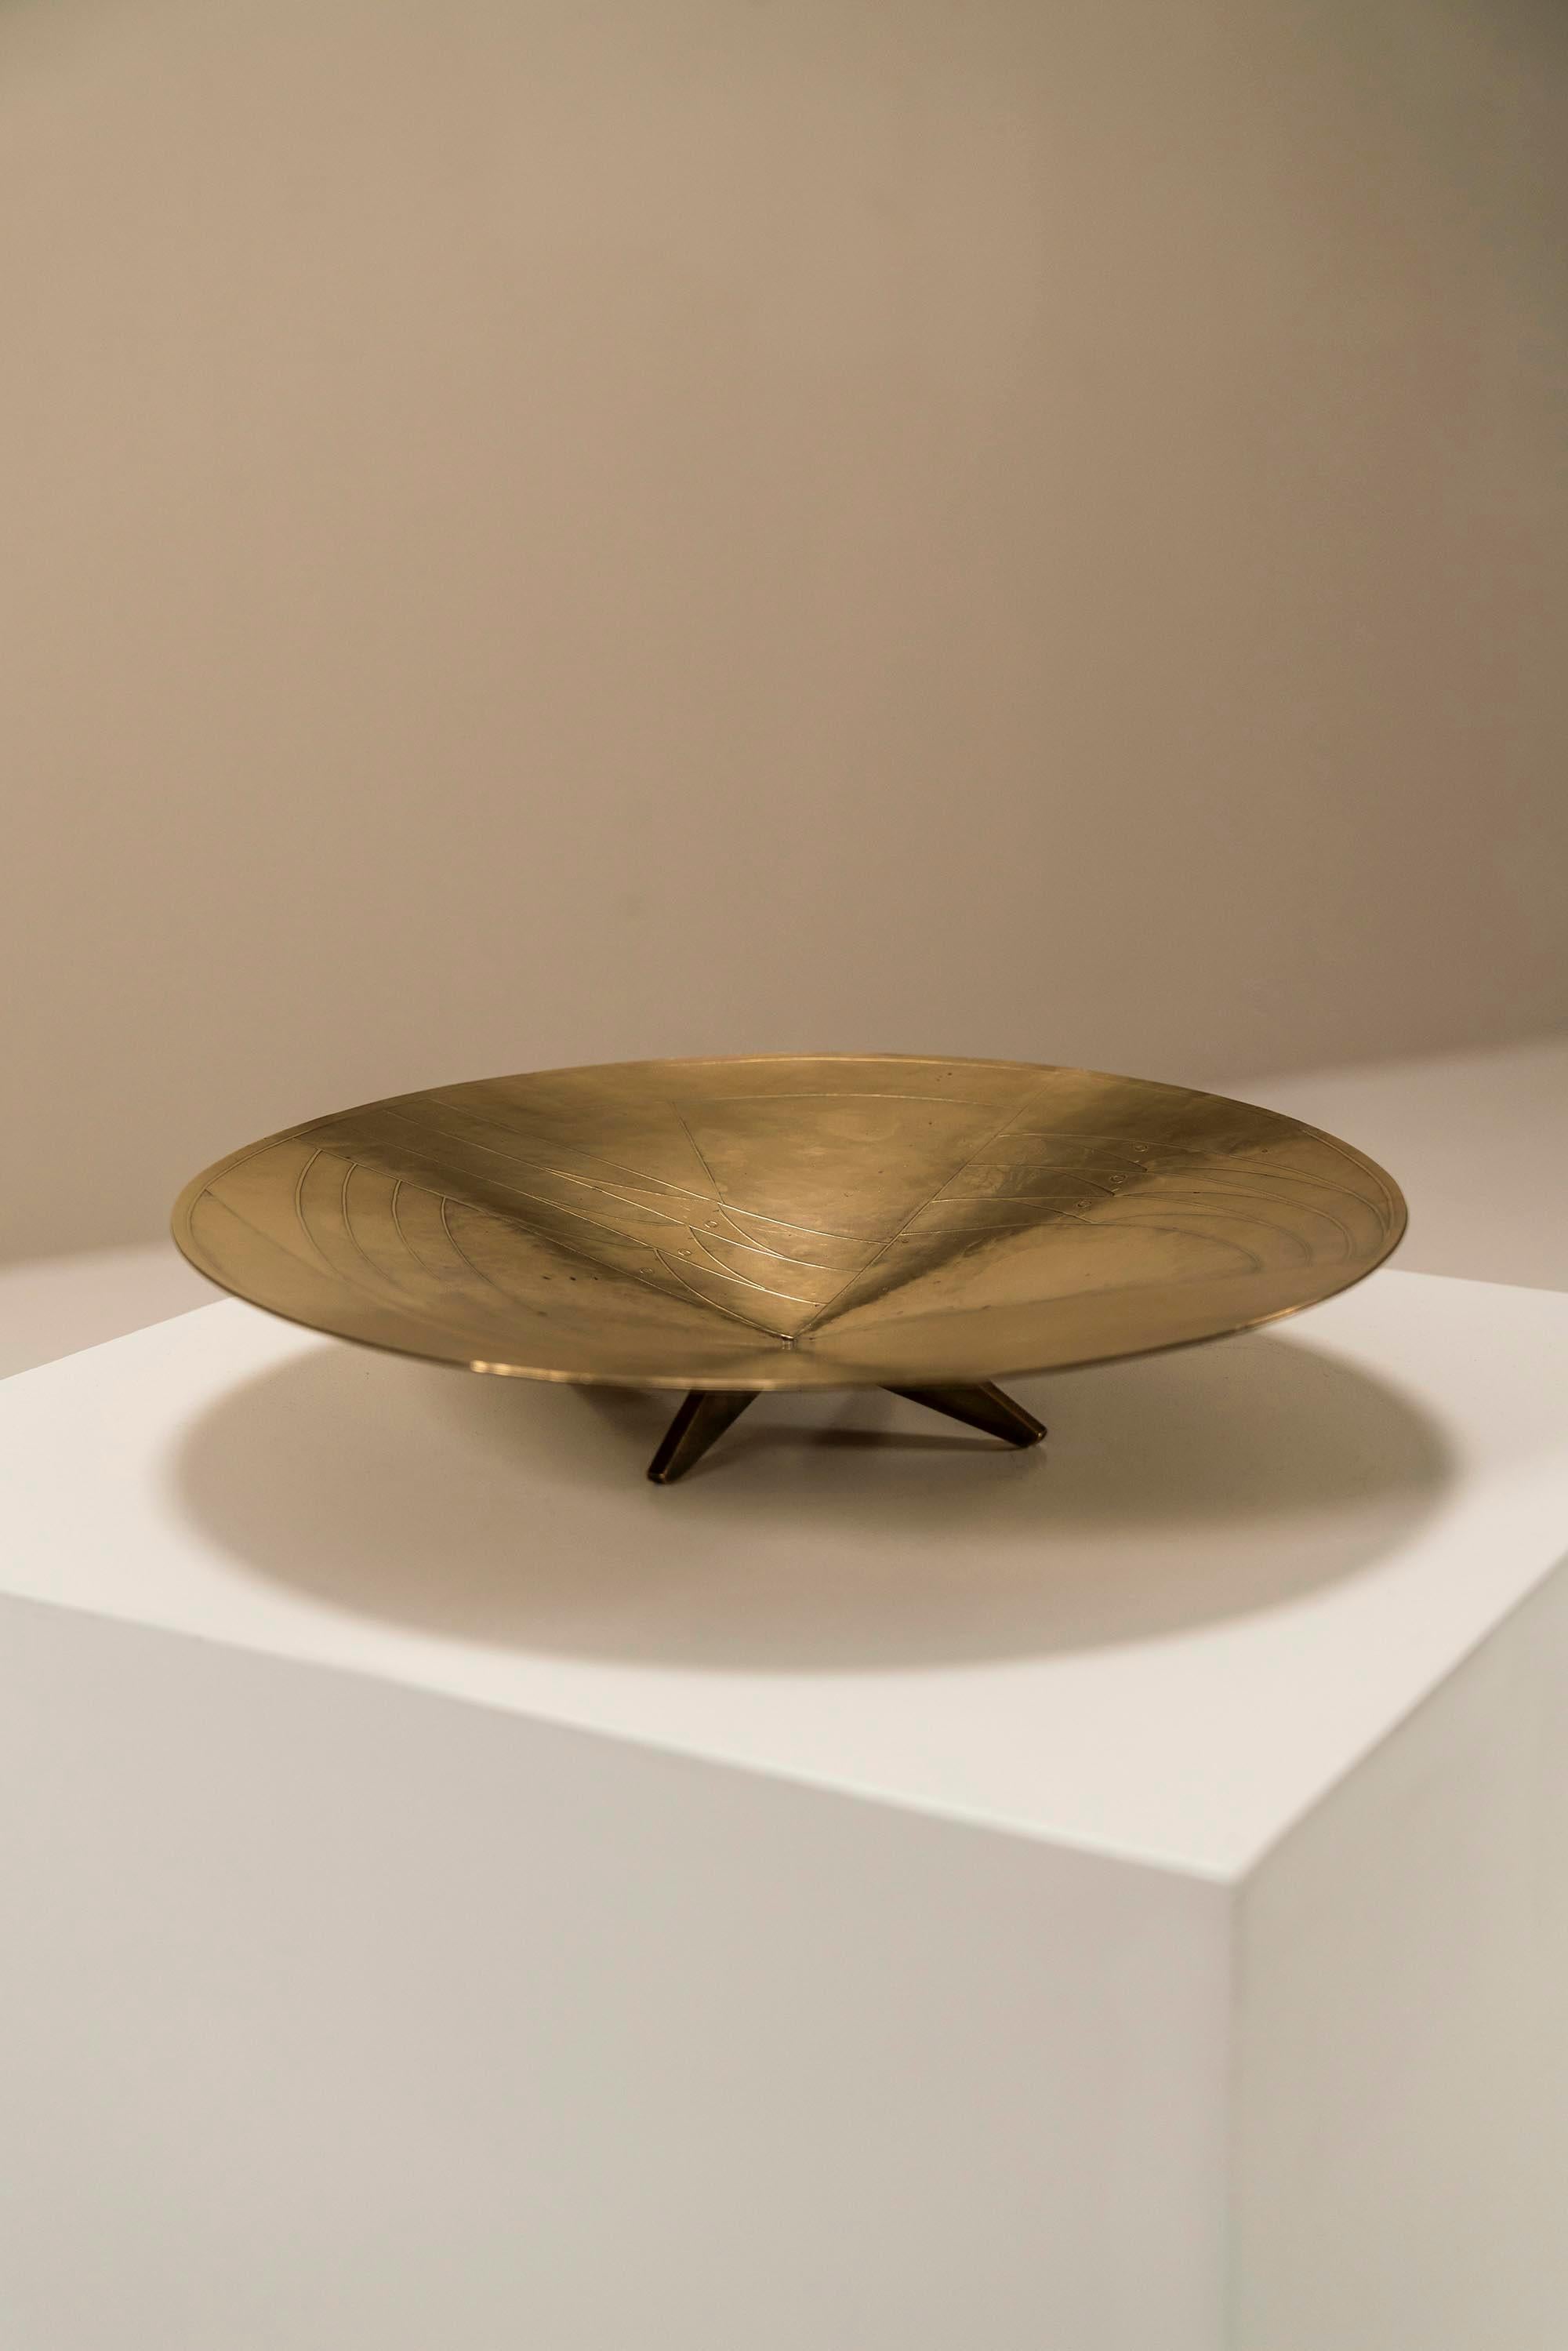 Abstract Decorated Bowl in Hammered Brass by Cris Agterberg, Netherlands 1934 1